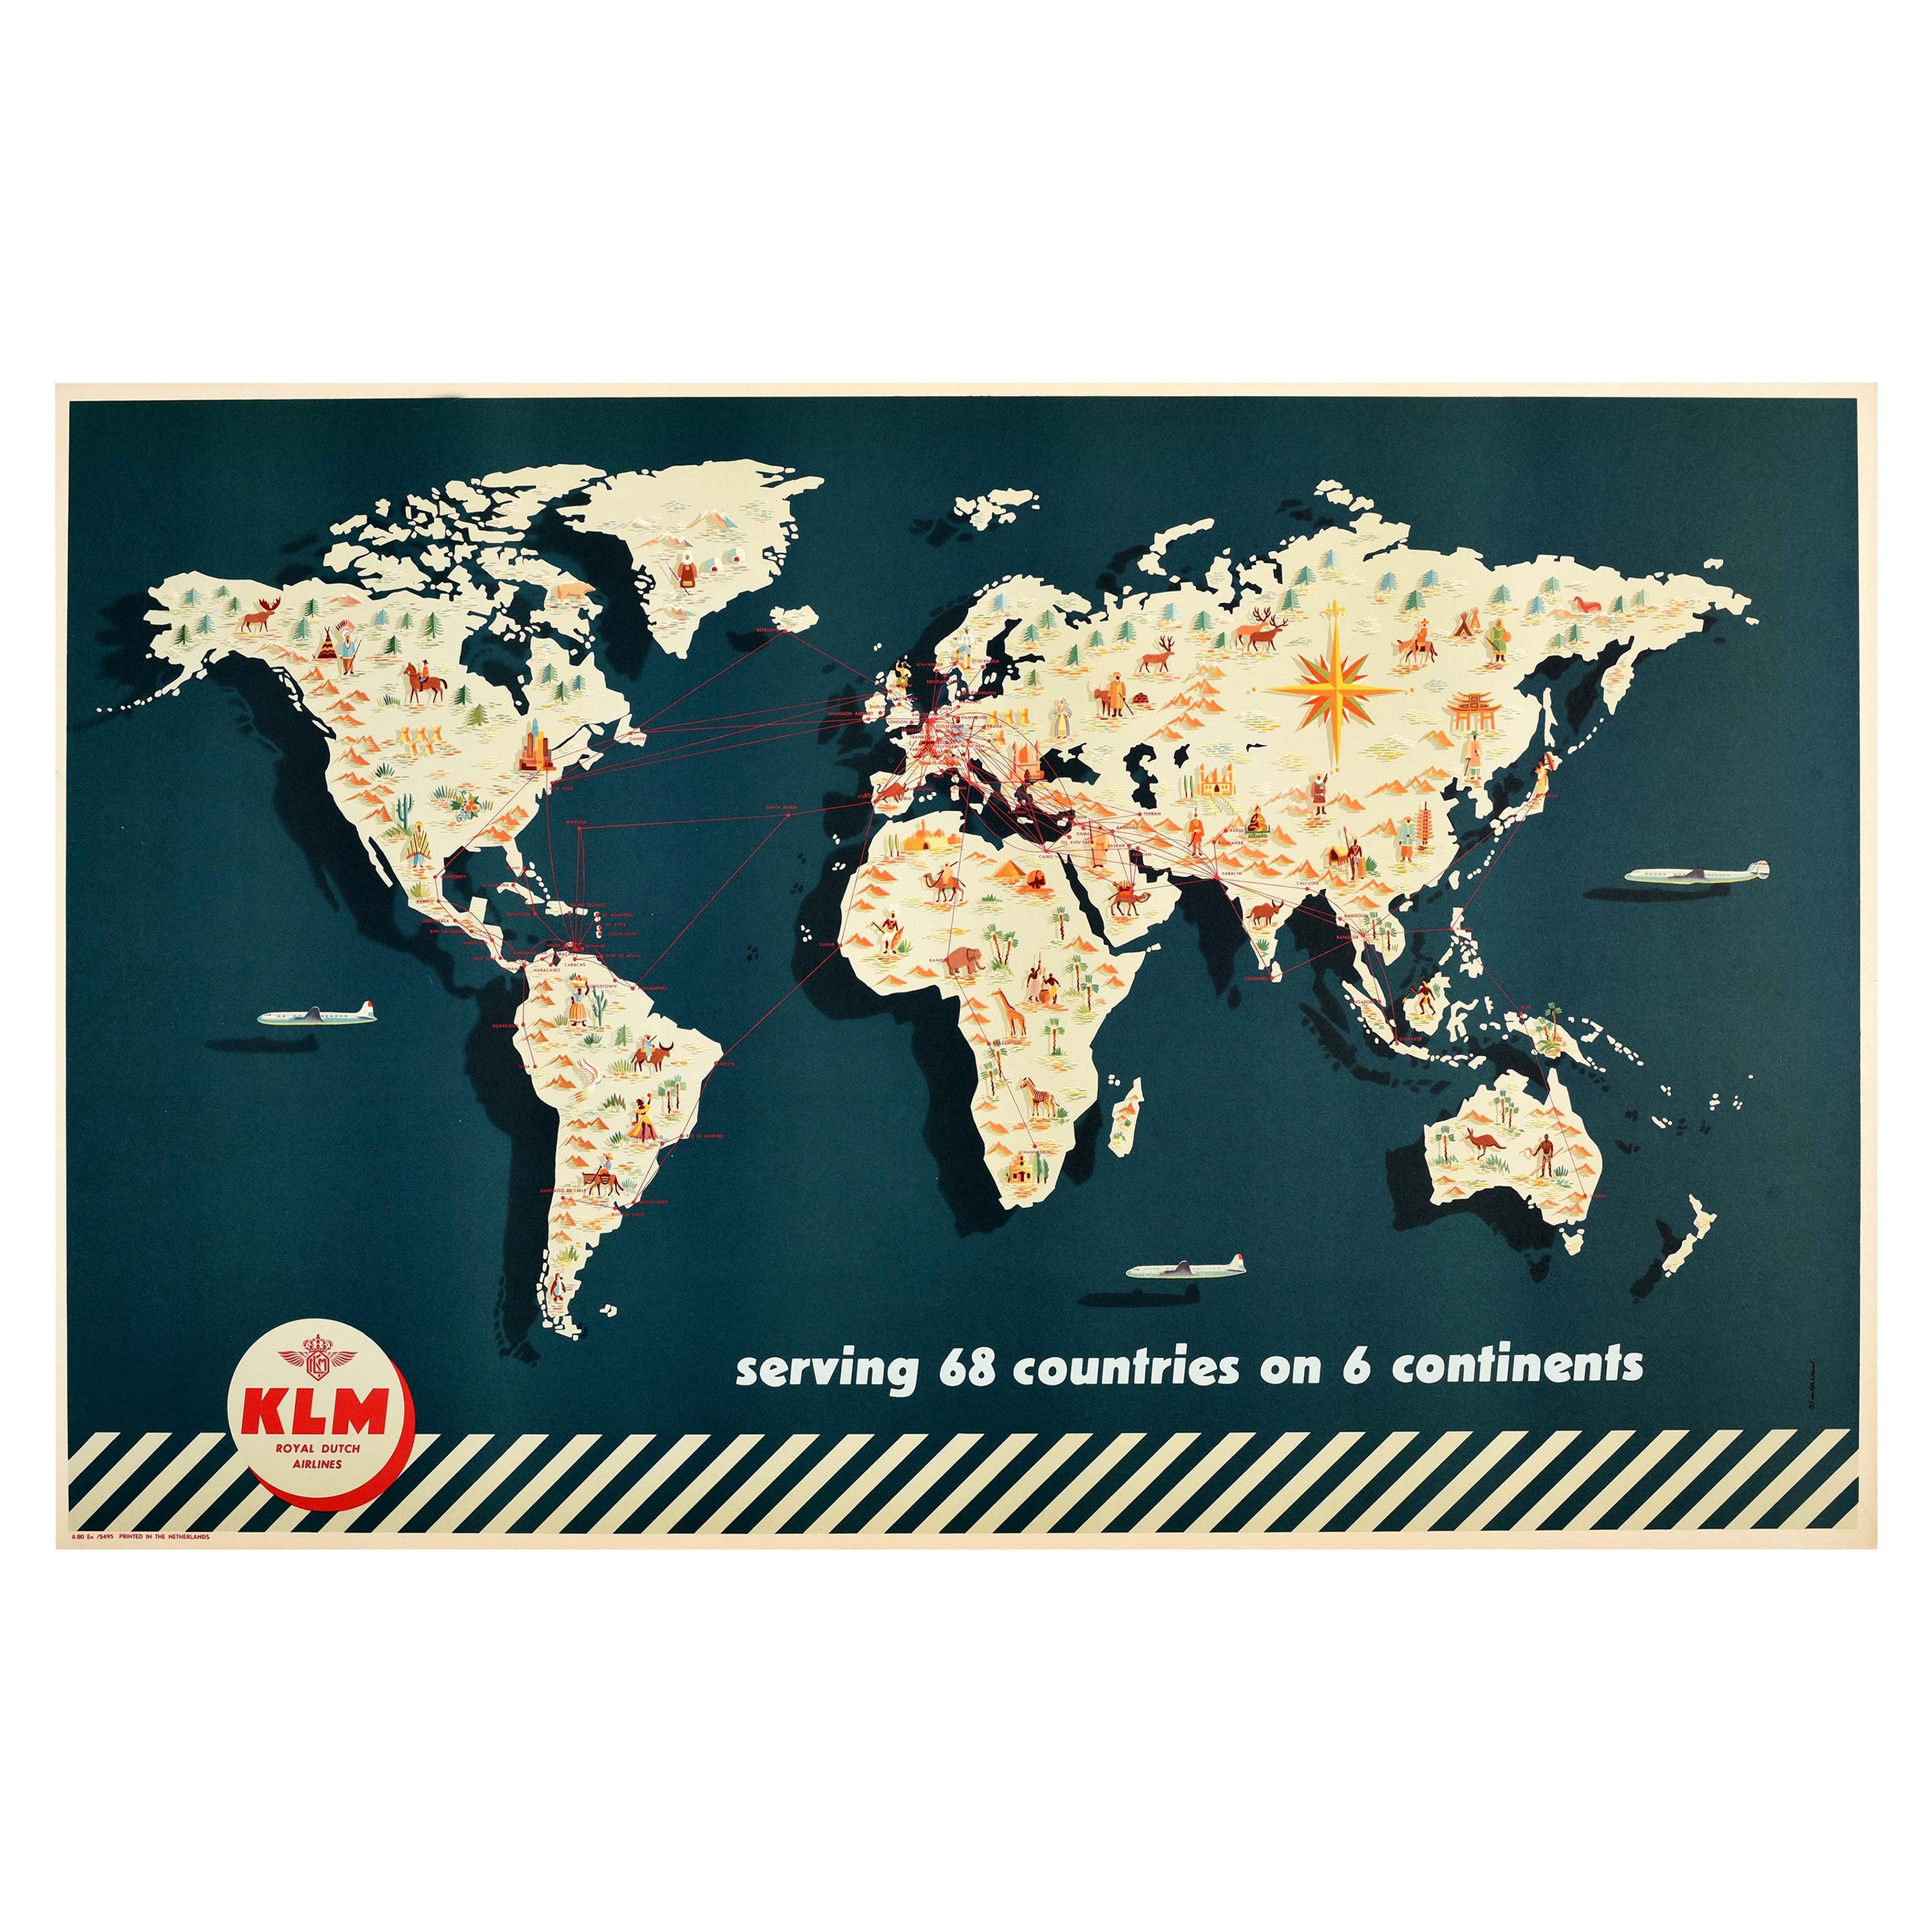 Original Vintage Poster KLM Airline Route Map Travel 68 Countries 6 Continents